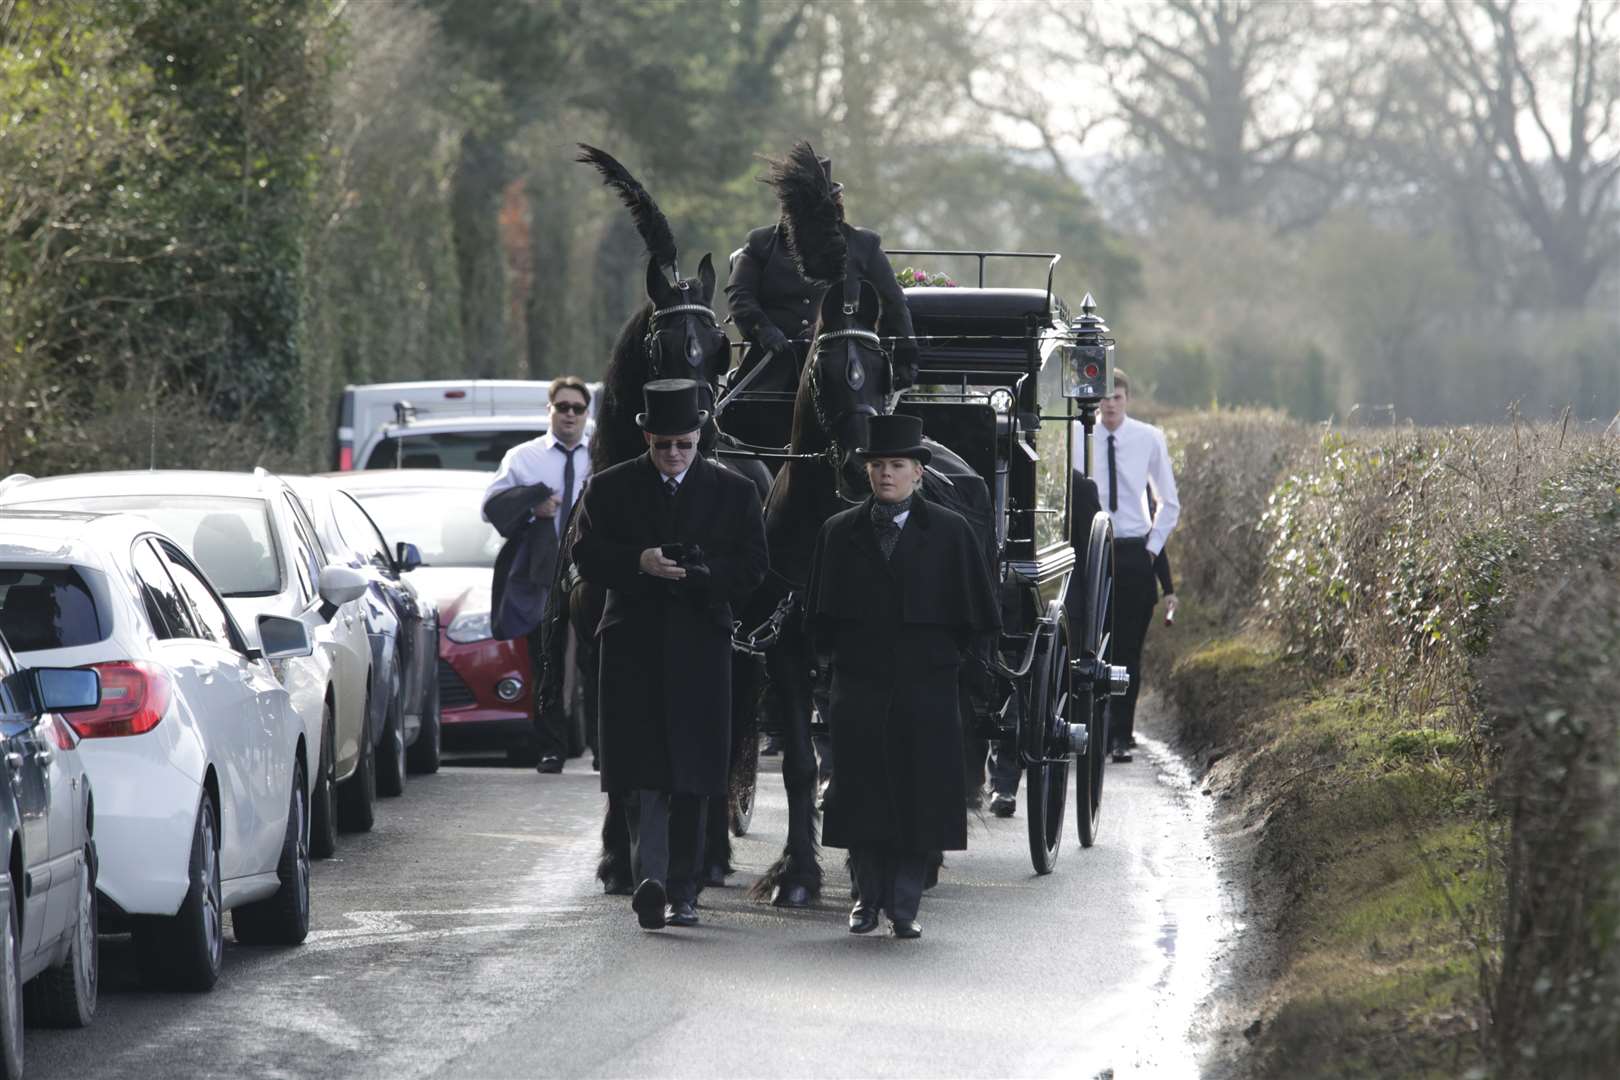 The procession was led by a horse drawn hearse